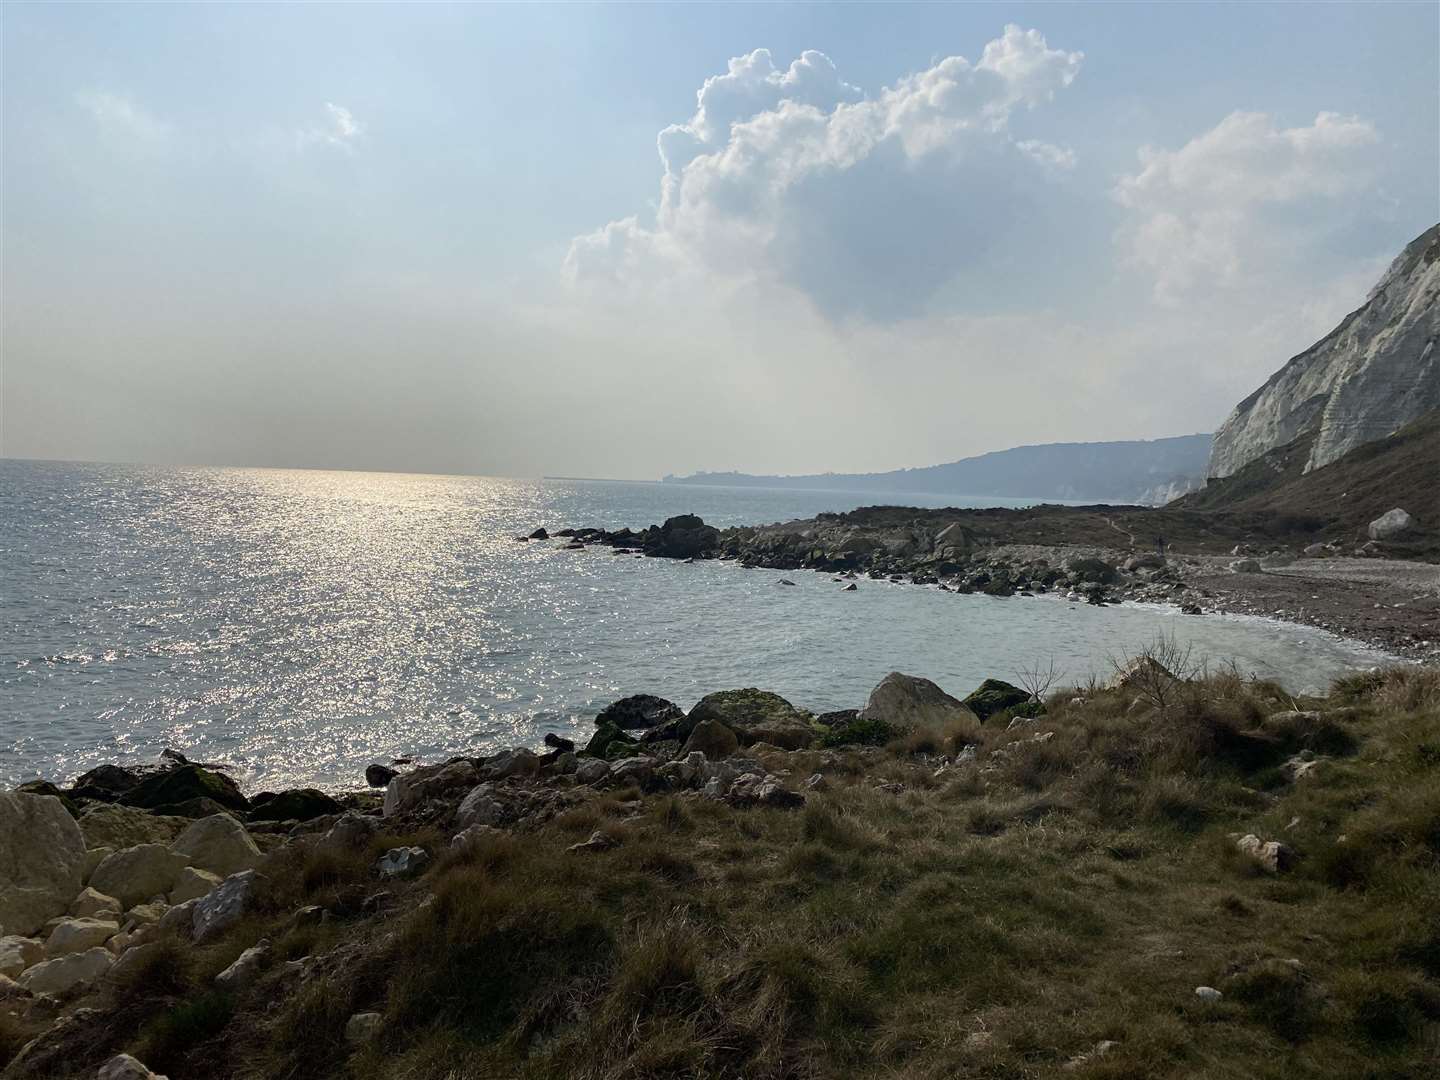 Stroll through Samphire Hoe, a picturesque nature reserve in Dover. Picture: KM reporter